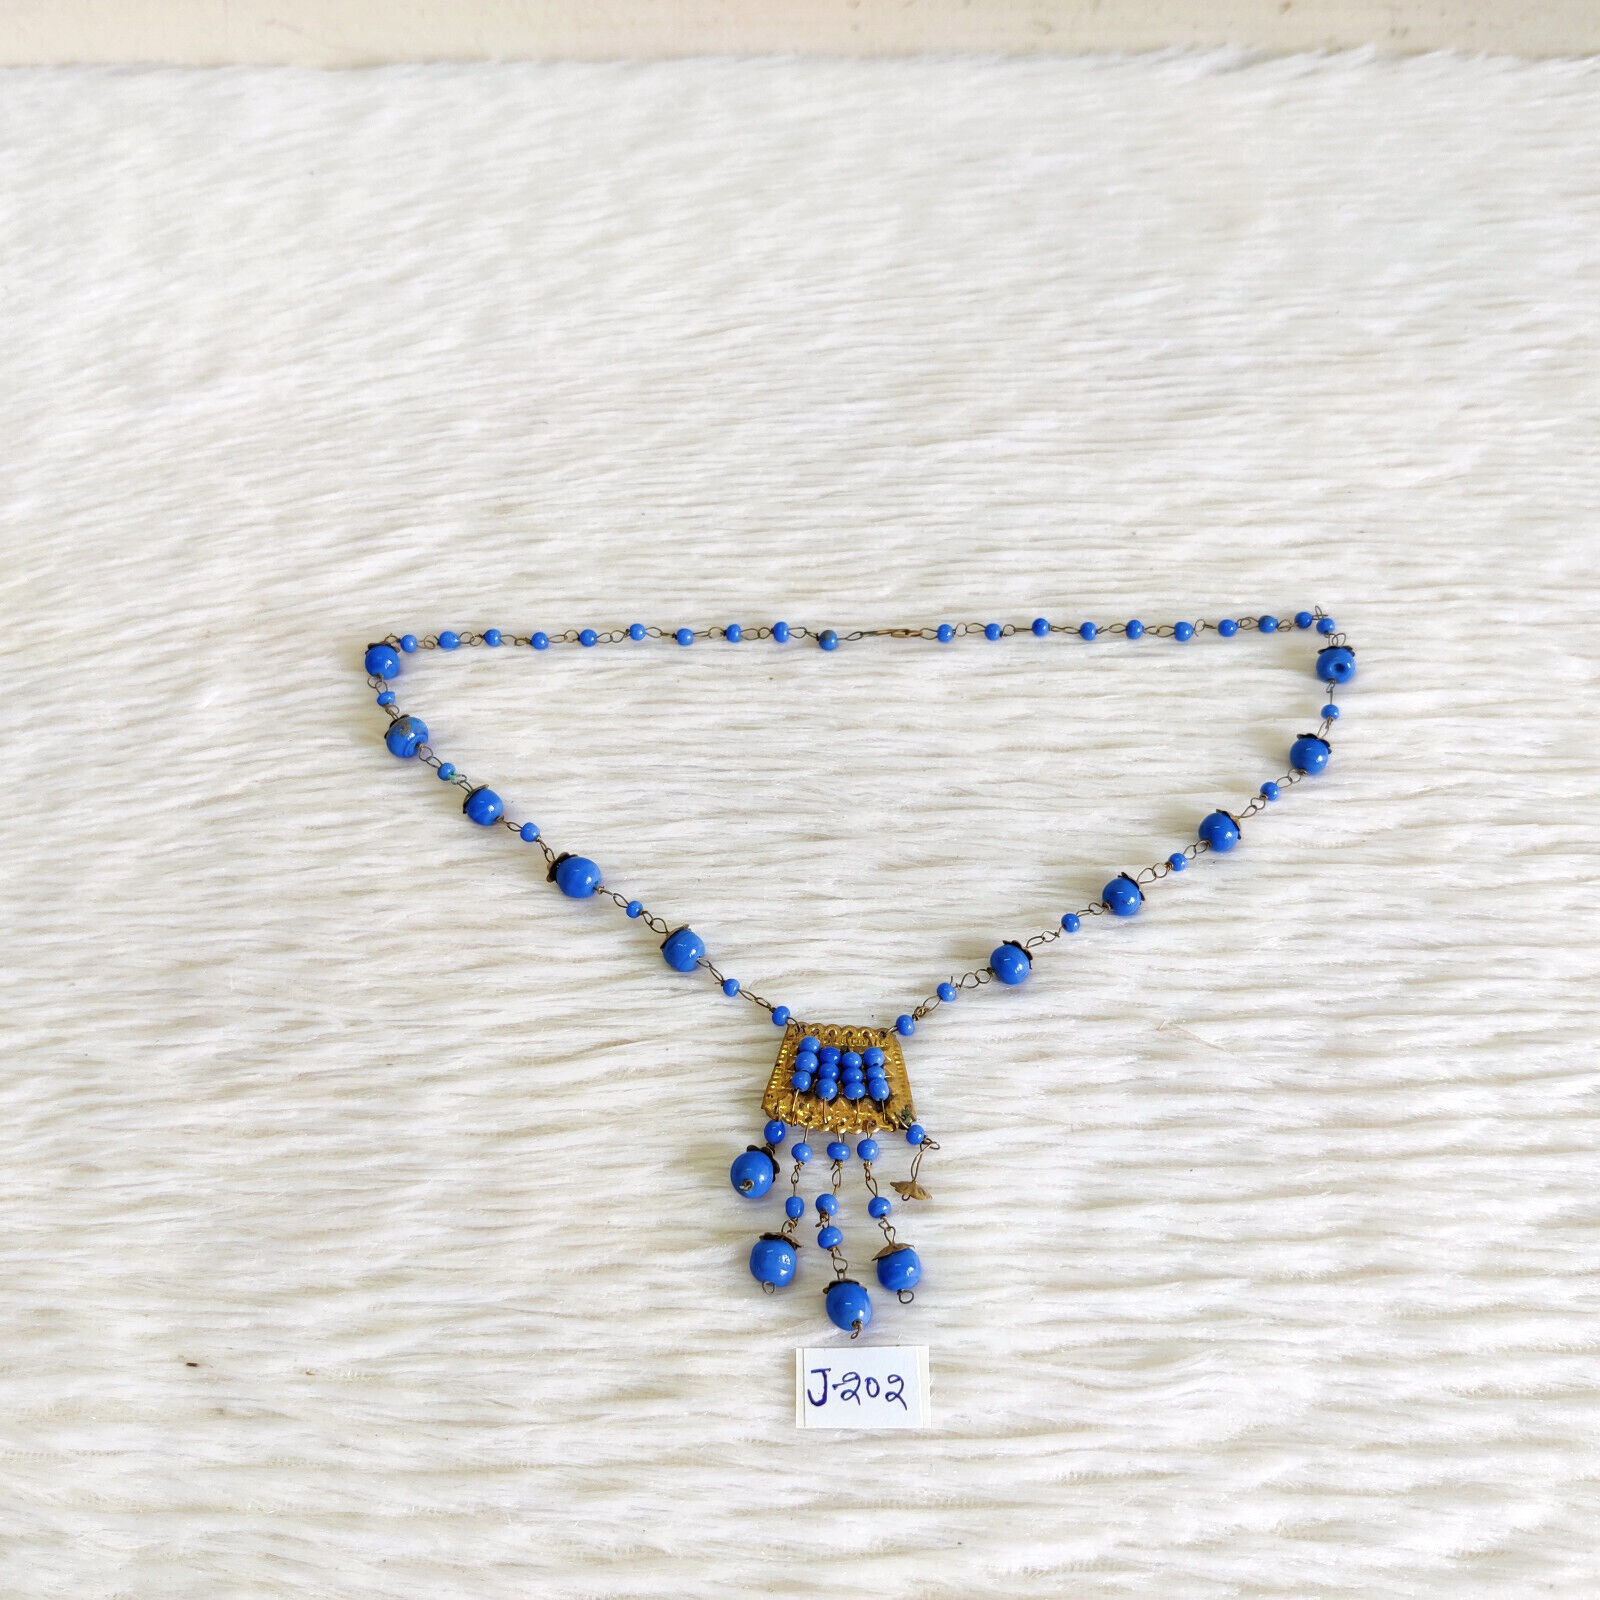 Antique Blue Beads Tribal Wearing Rosary Jewelry Decorative Old Collectible J202